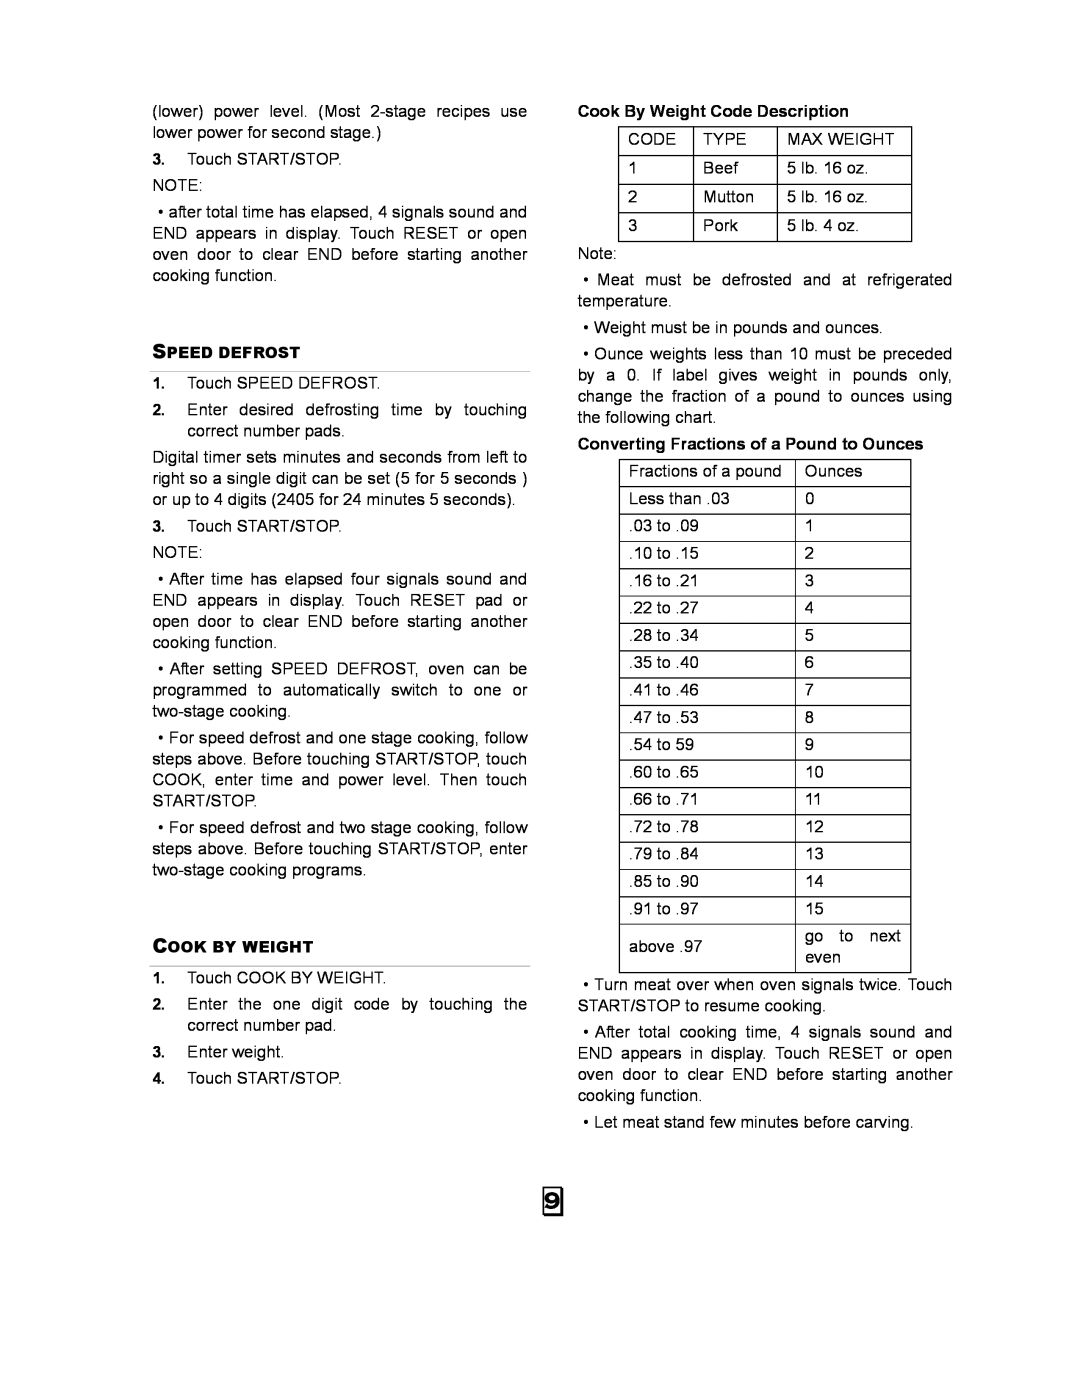 Kenmore 87090 owner manual Cook By Weight Code Description, Converting Fractions of a Pound to Ounces 